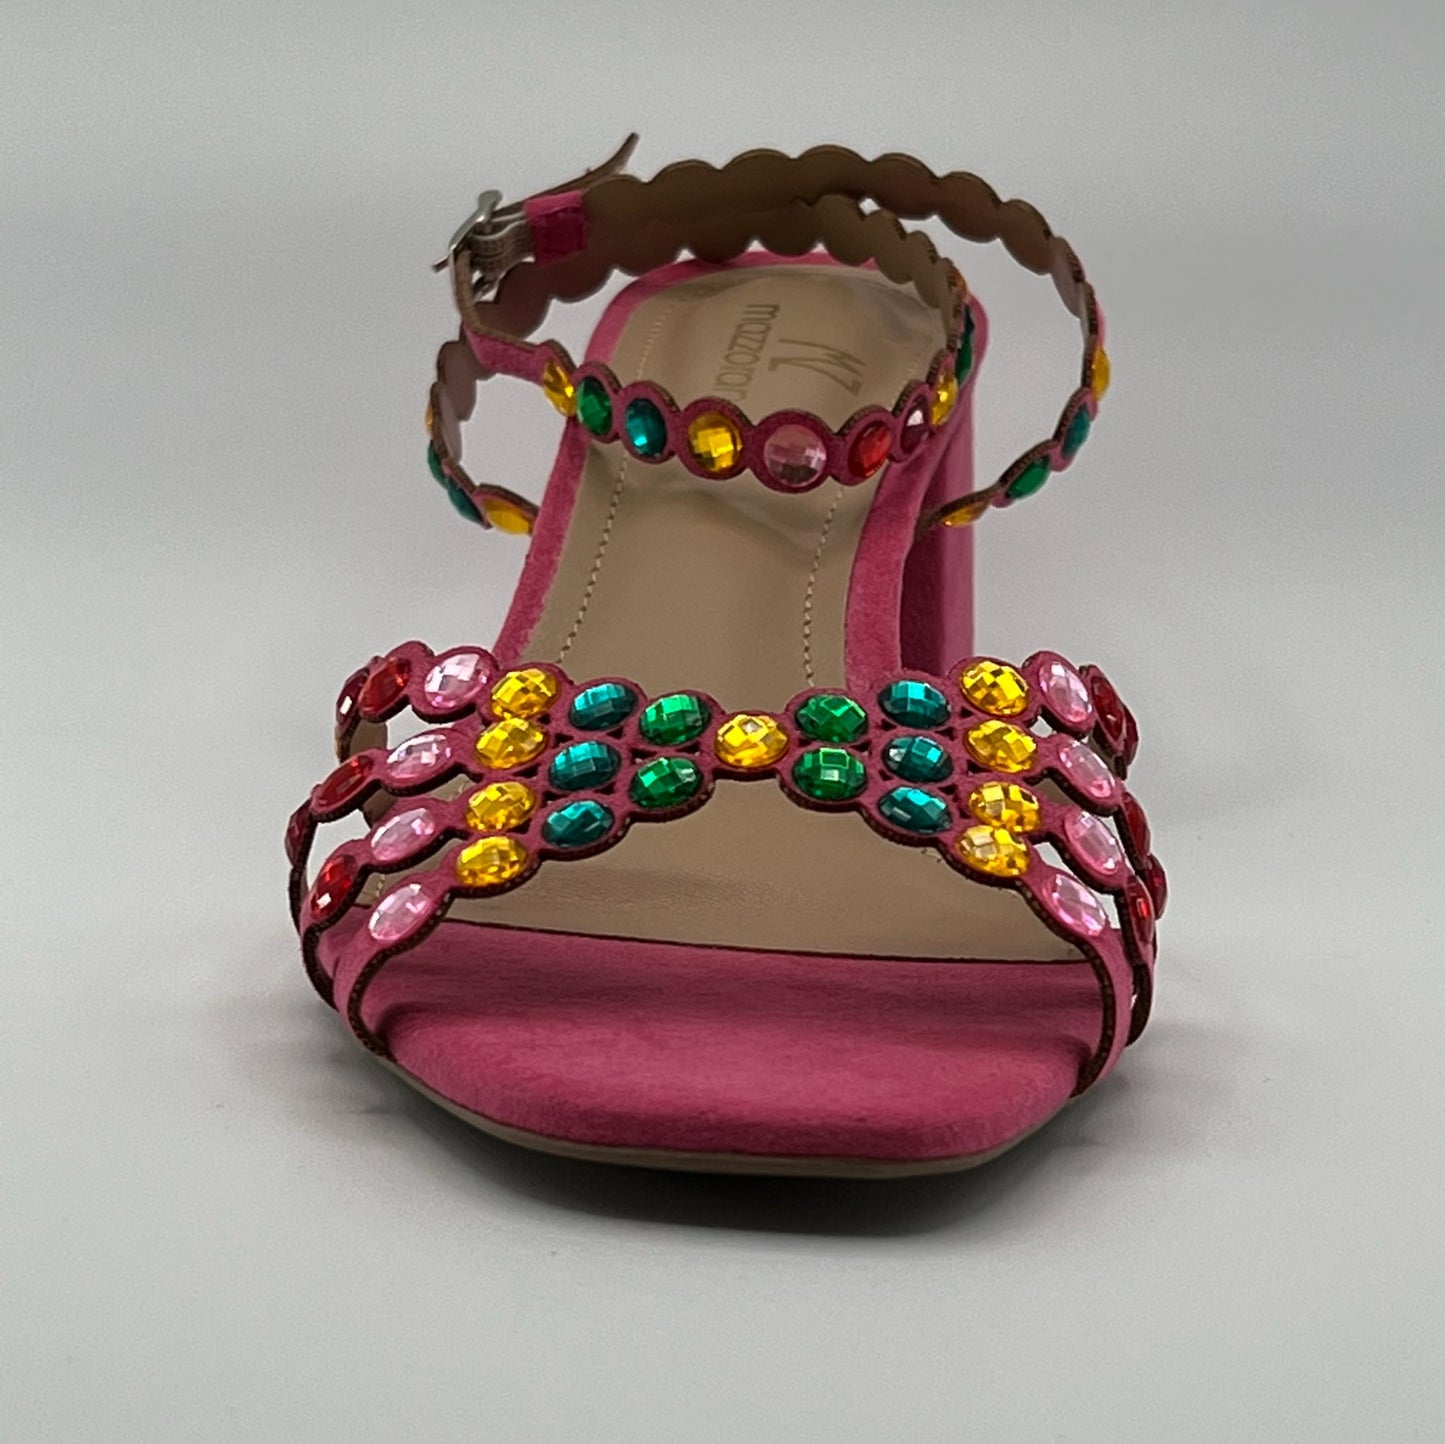 Pink sandals with colorful rocks embellishments, block hill ADORA